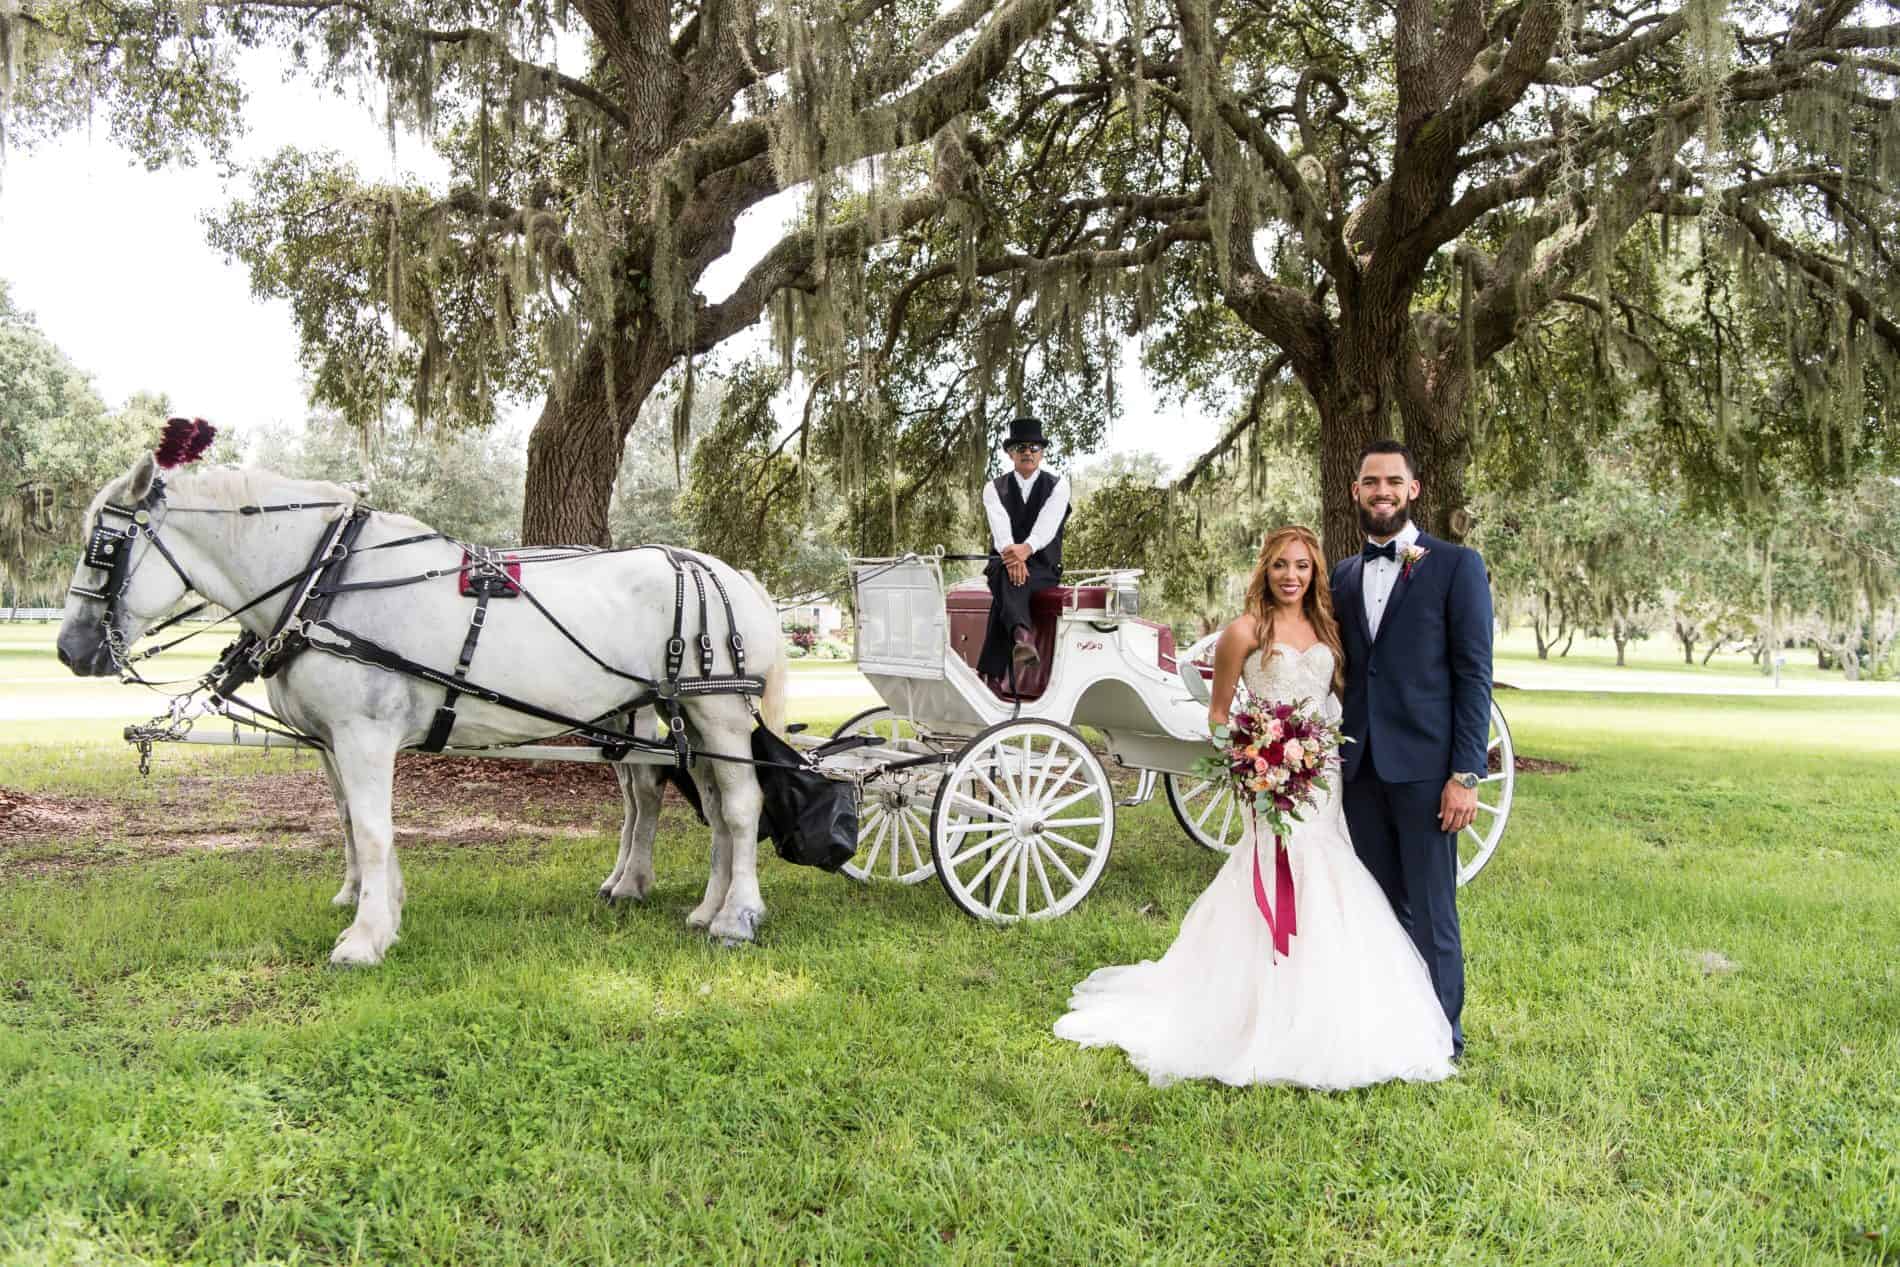 Wedding Honeyfunds can provide special touches like a horse drawn carriage